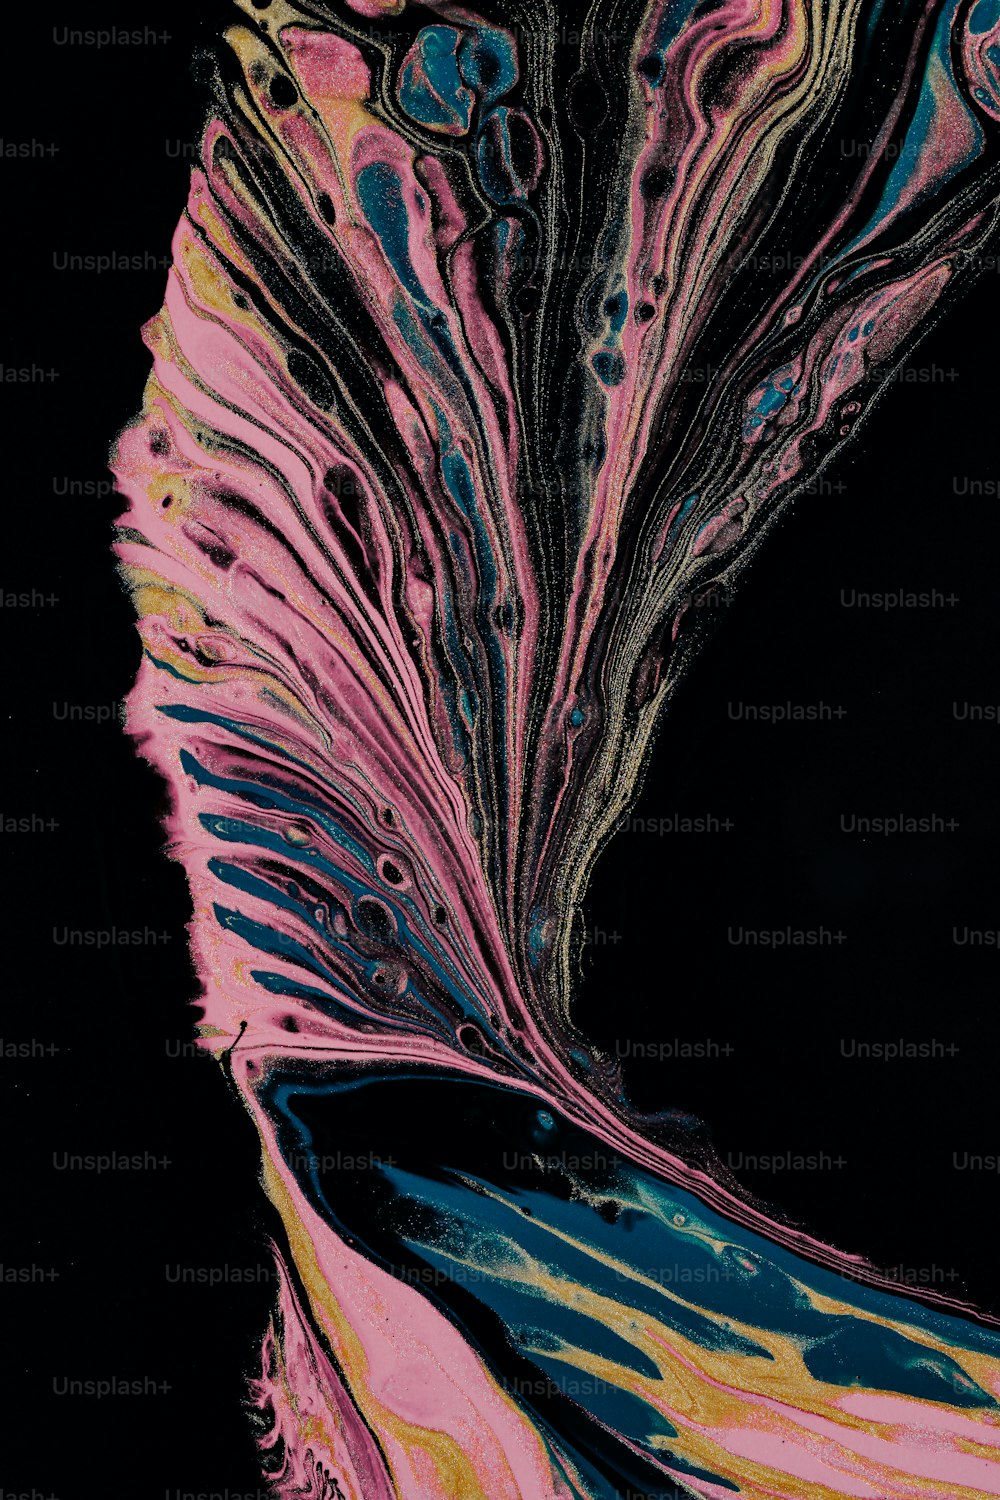 a black background with a pink and blue swirl